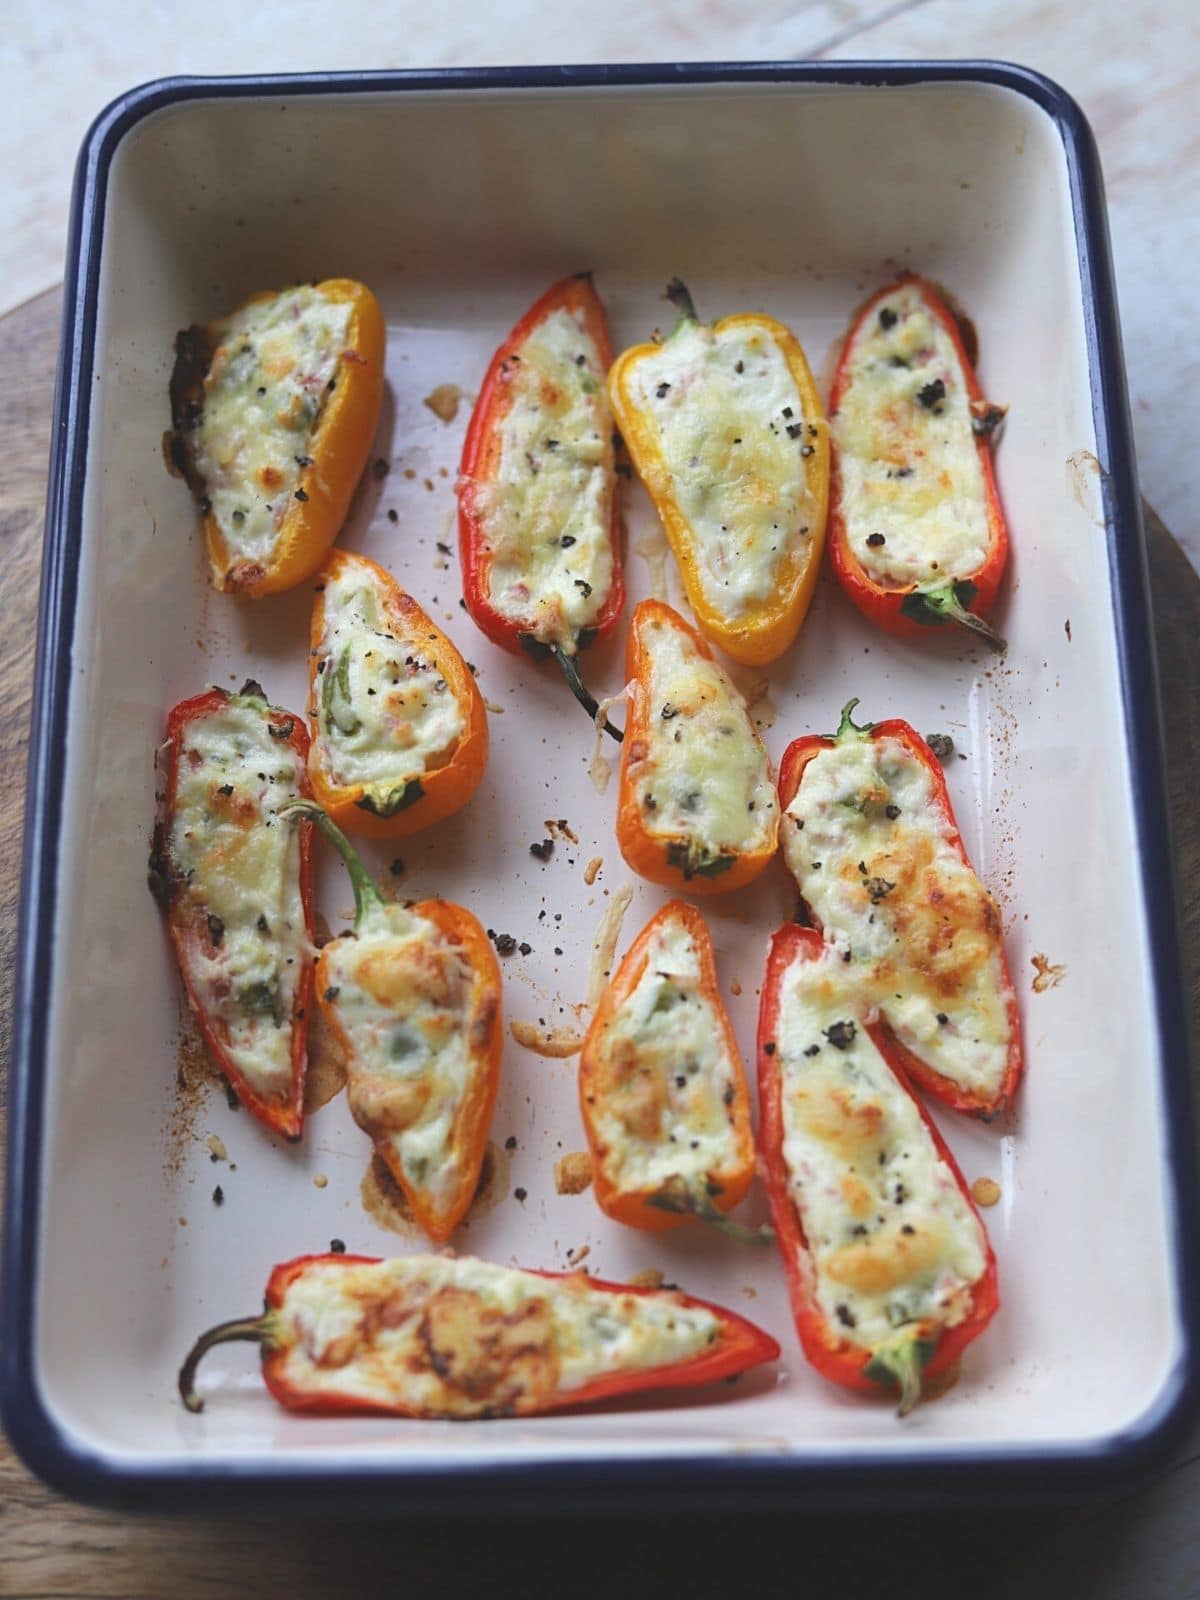 Roasted stuffed peppers in roasting dish.